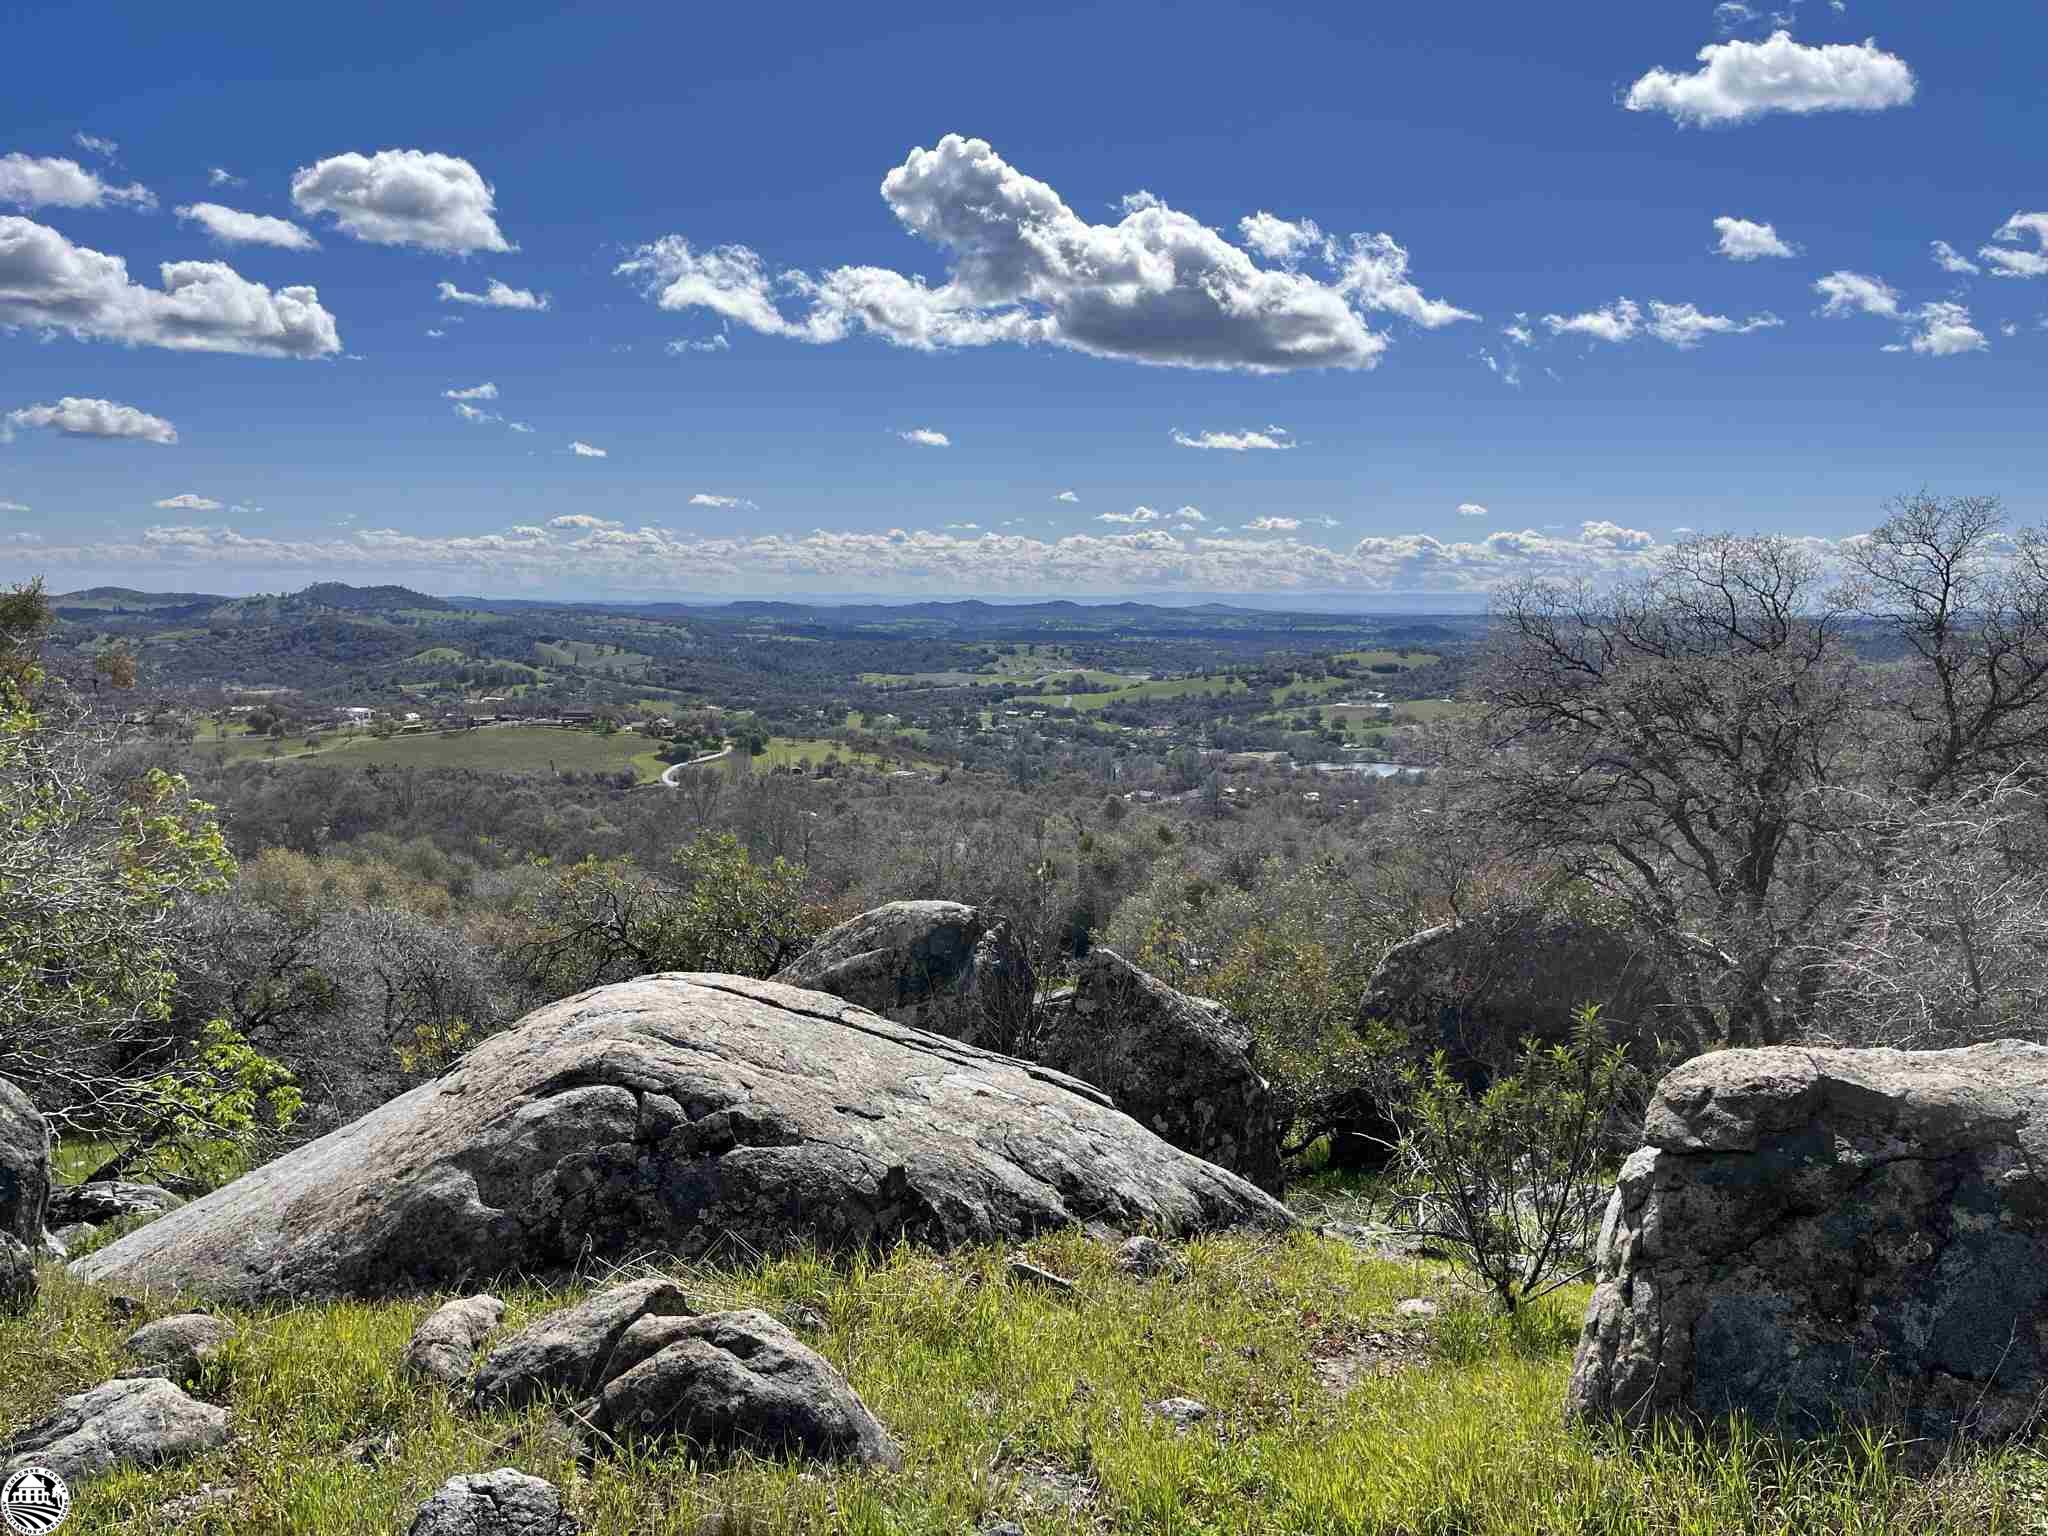 This stunning 3.69 acre lot is the perfect place to build your dream home. Located in Lambert Lakes, Tuolumne County's premier upscale neighborhood. With its breathtaking views you can see for miles towards the central valley and south to the Sierra Nevada Mountains. The lot is gently sloped making a great building site for your dream home with additional room to fit your needs. Granite boulders add to this lot's natural beauty creating a unique outdoor setting. District water and power are ready for hookup. Don't miss out on the last lot in Lambert Lakes. See it today!